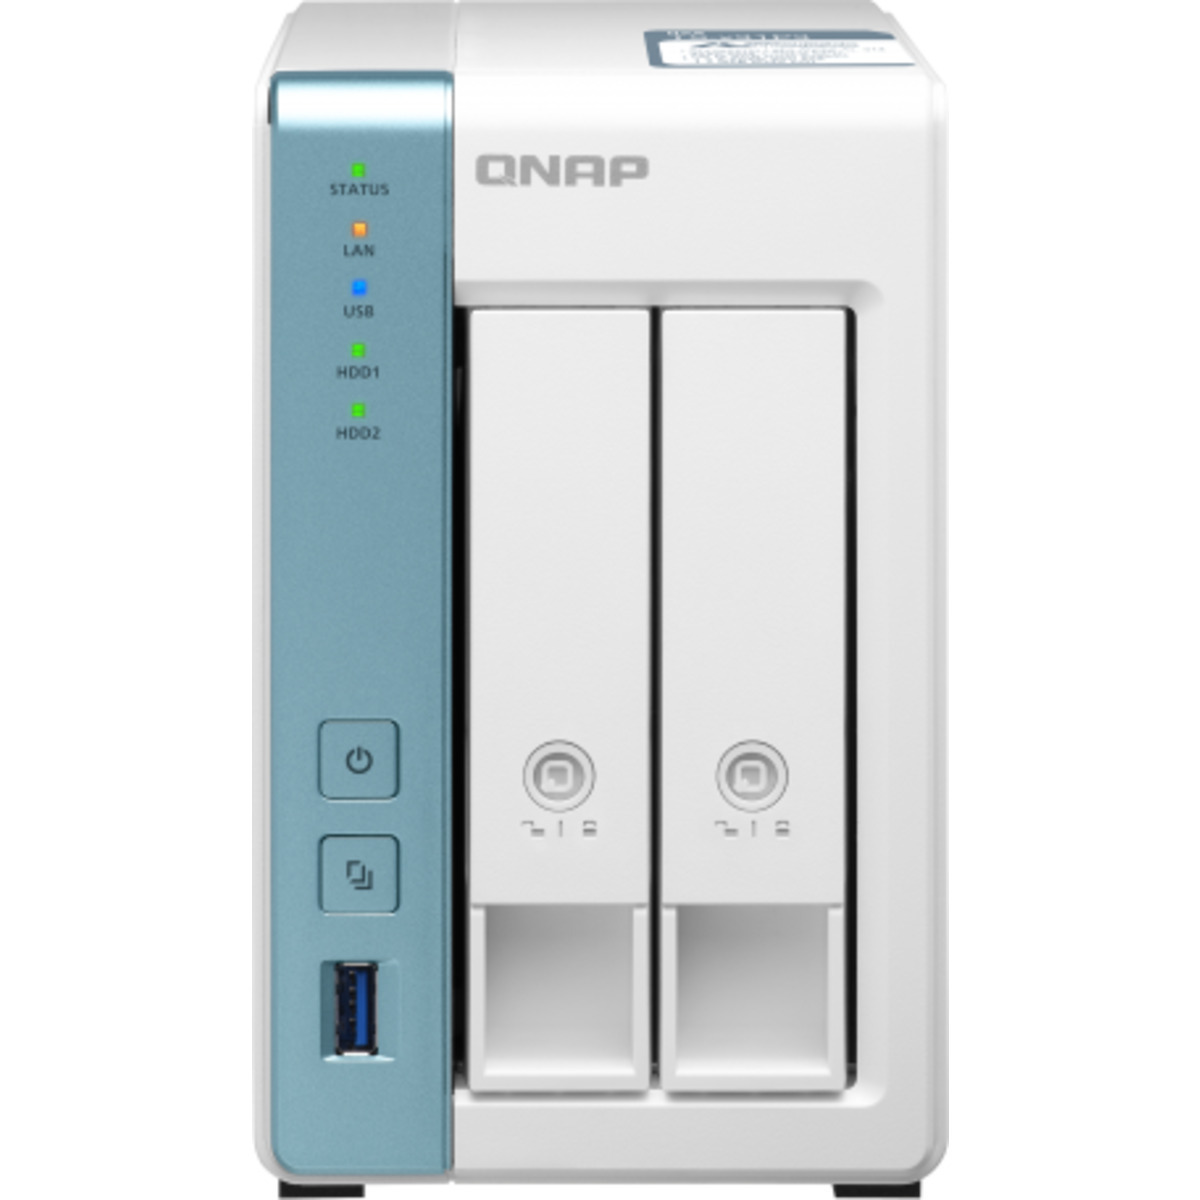 buy $1280 QNAP TS-231P3 36tb Desktop NAS - Network Attached Storage Device 2x18000gb Toshiba Enterprise Capacity MG09ACA18TE 3.5 7200rpm SATA 6Gb/s HDD ENTERPRISE Class Drives Installed - Burn-In Tested - FREE RAM UPGRADE - nas headquarters buy network attached storage server device das new raid-5 free shipping usa christmas new year holiday sale TS-231P3